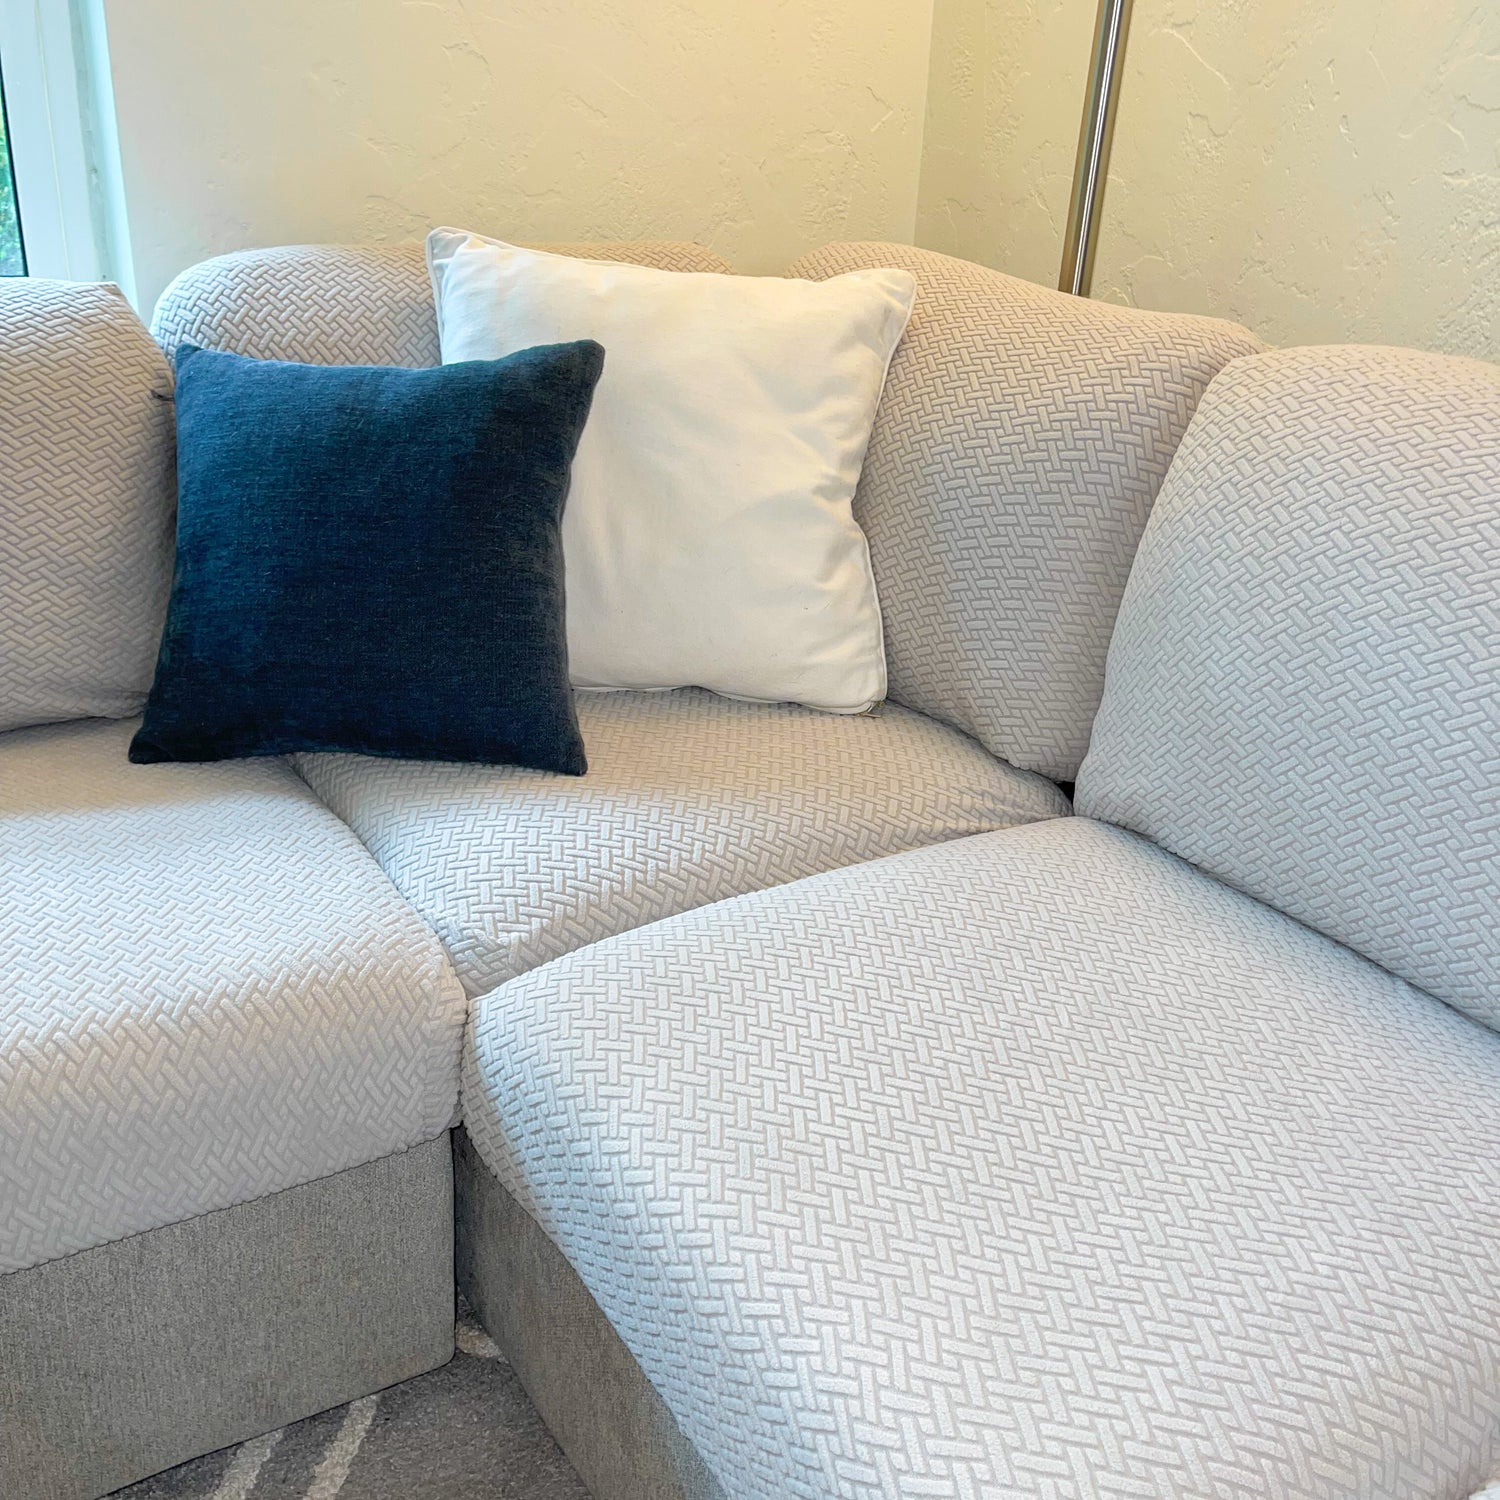 6 Creative Ways to Safeguard Your Sofa with Stylish Covers - Nolan Interior